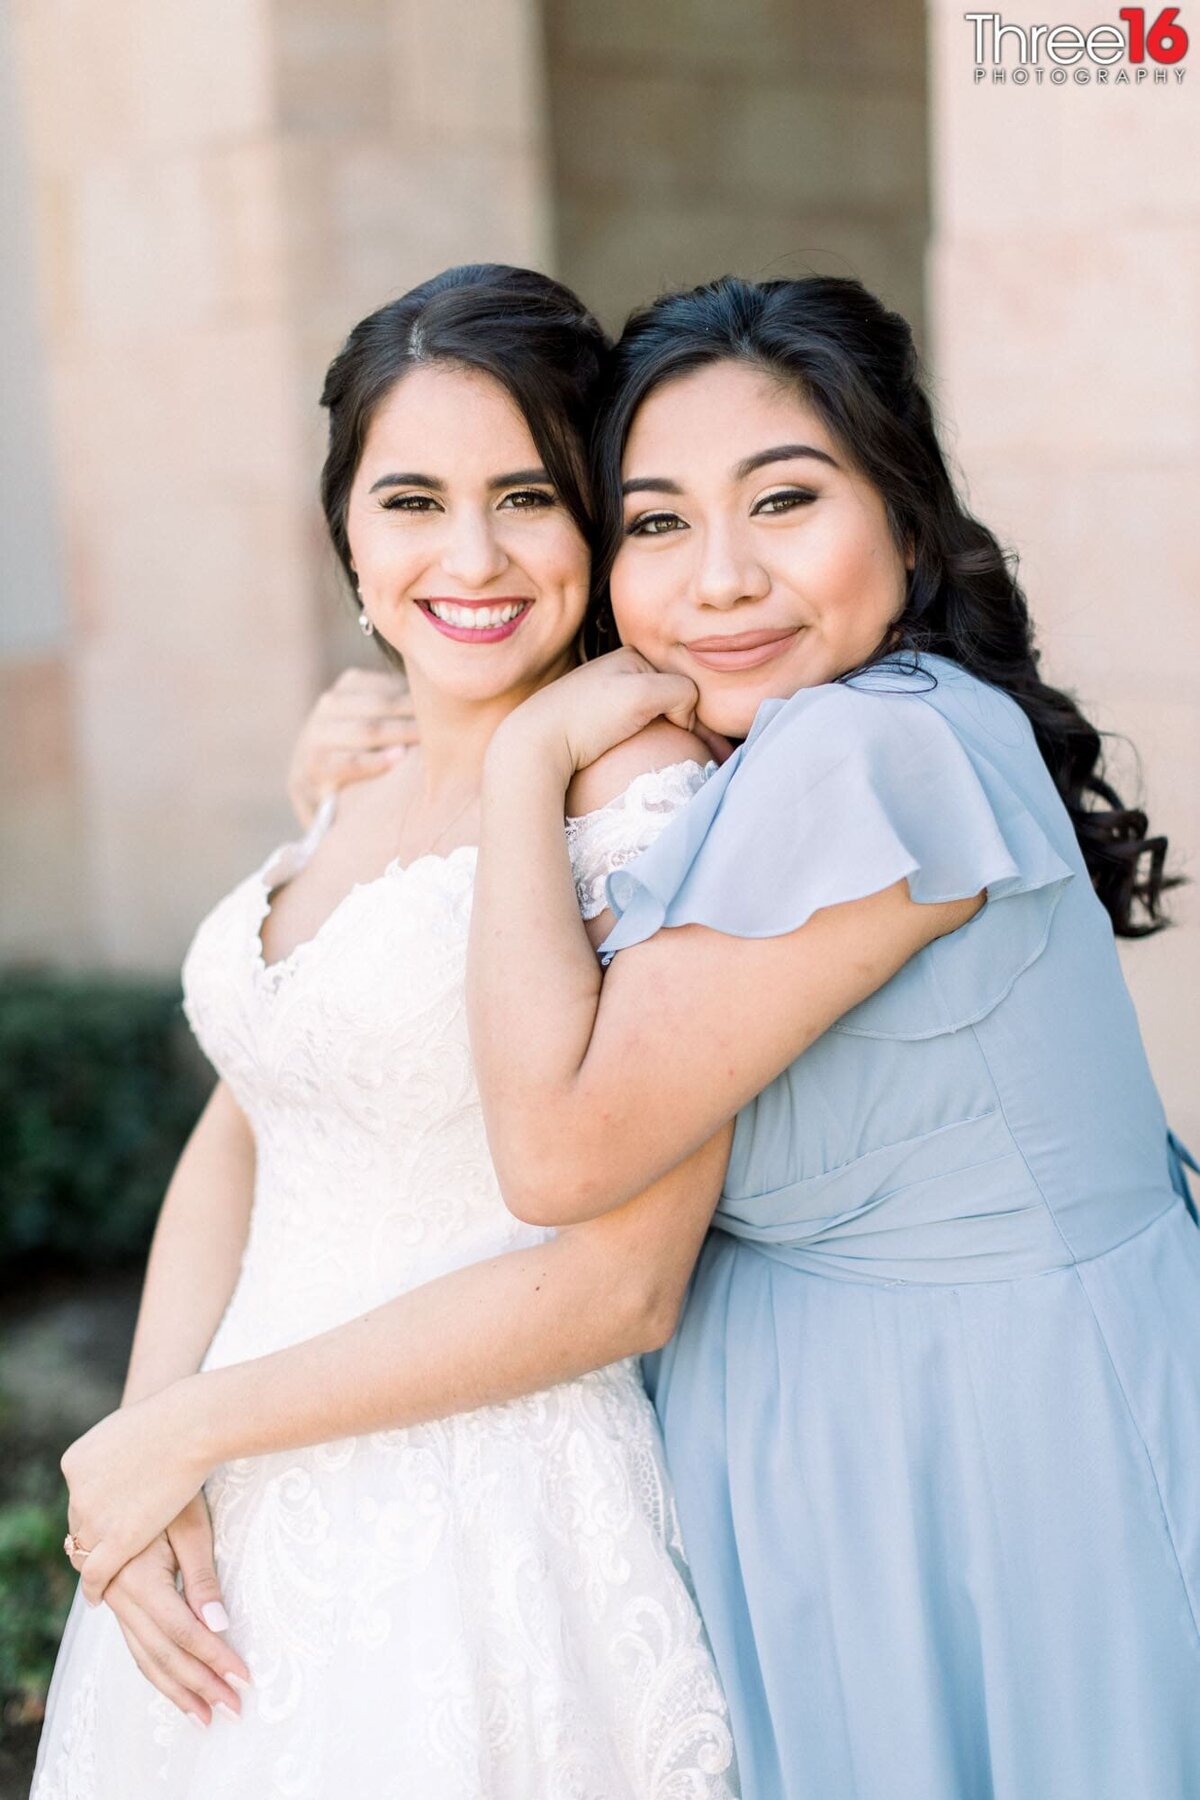 Bridesmaid embraces the Bride from behind during photo session